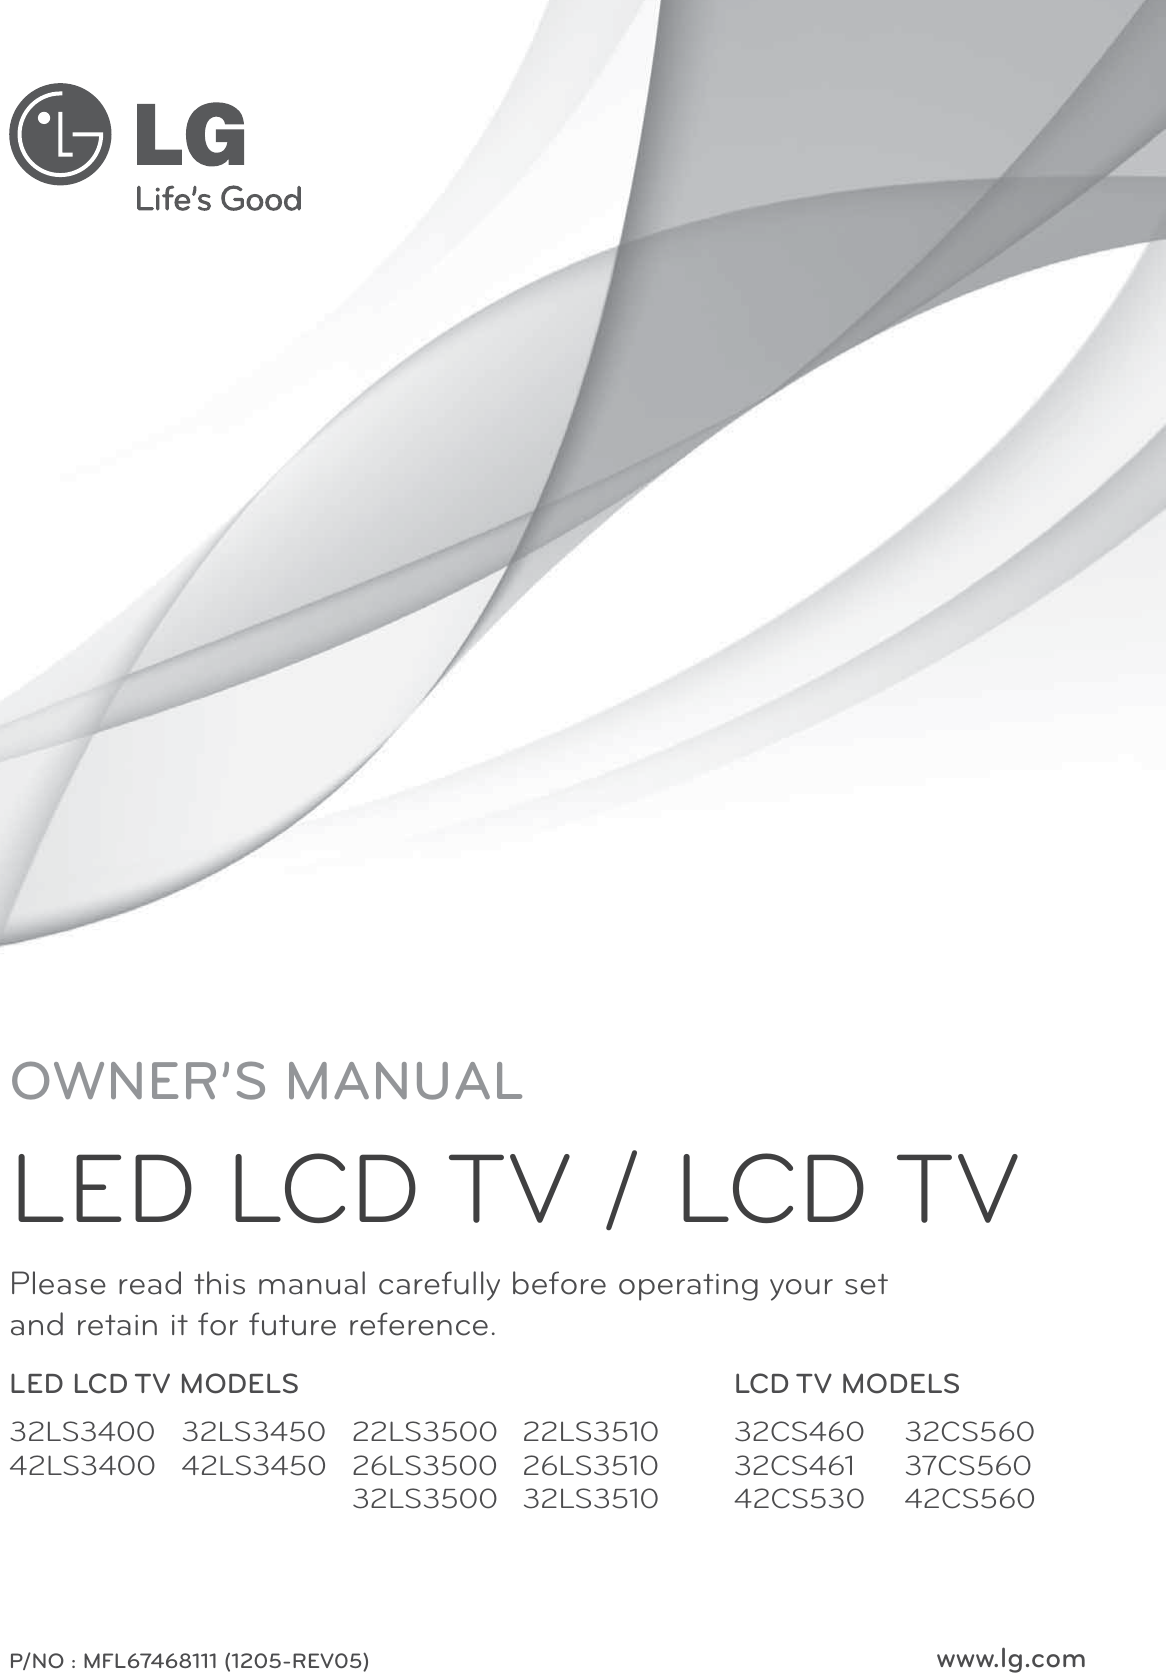 www.lg.comPlease read this manual carefully before operating your set  and retain it for future reference.P/NO : MFL67468111 (1205-REV05)OWNER’S MANUALLED LCD TV / LCD TVLED LCD TV MODELS LCD TV MODELS32LS340042LS340022LS350026LS350032LS350032LS345042LS345022LS351026LS351032LS351032CS46032CS46142CS53032CS56037CS56042CS560